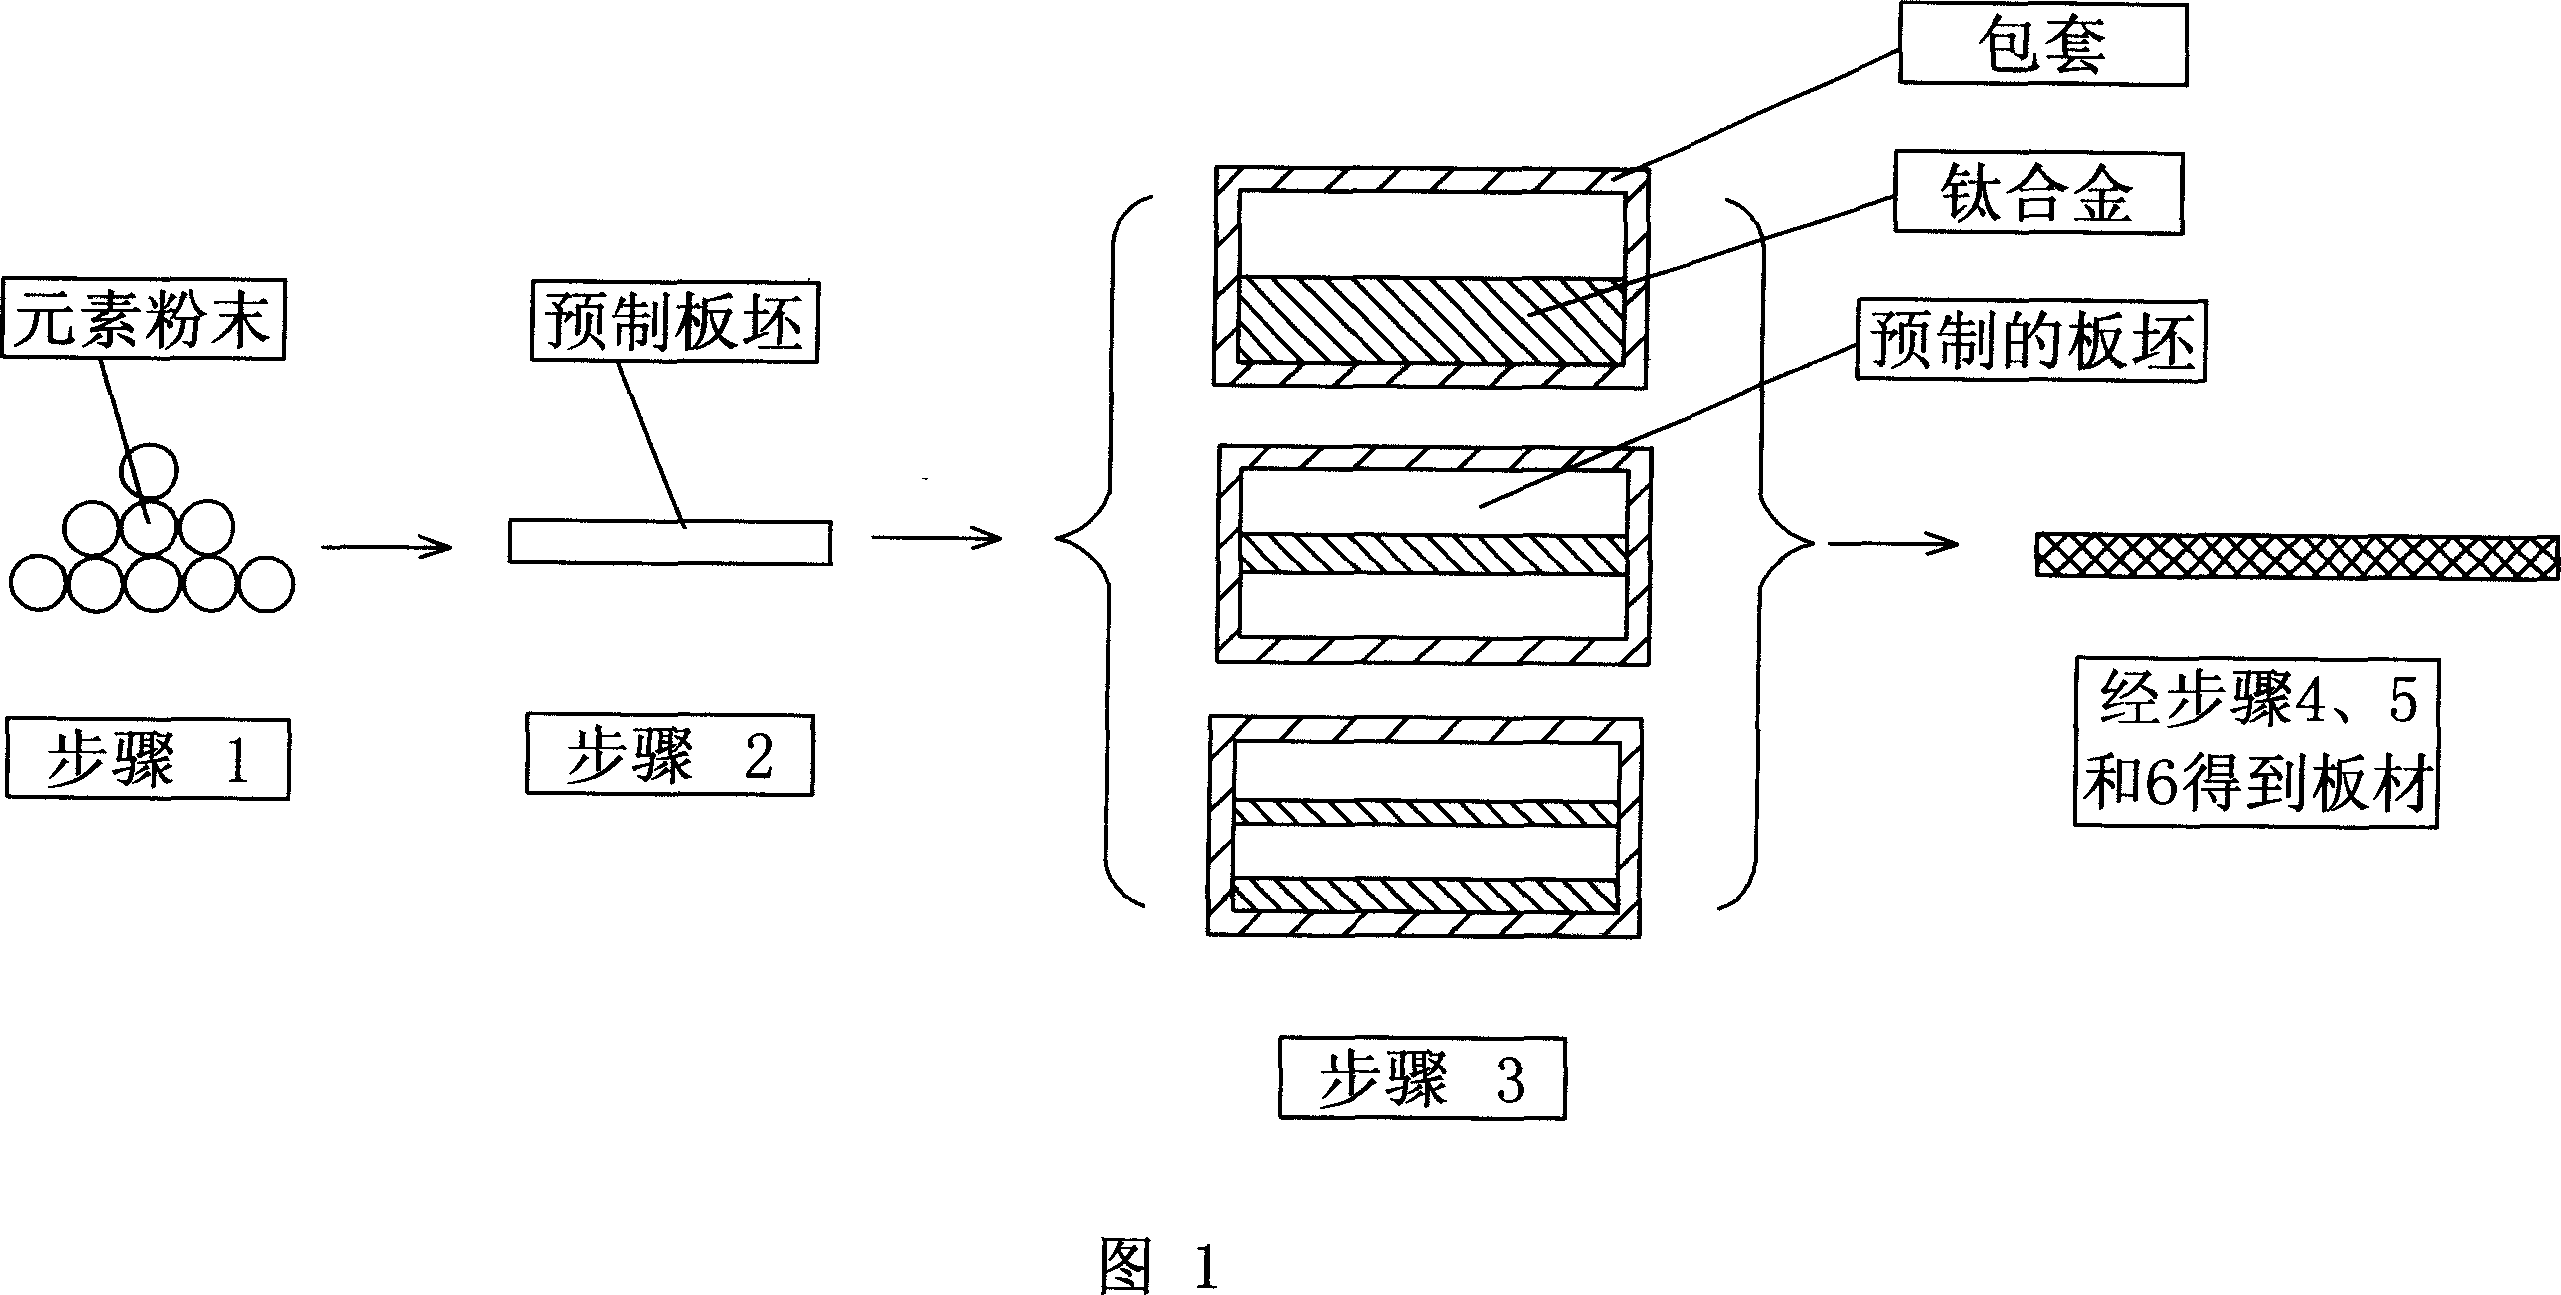 Method for preparing TiAl alloy clad plate by element powder